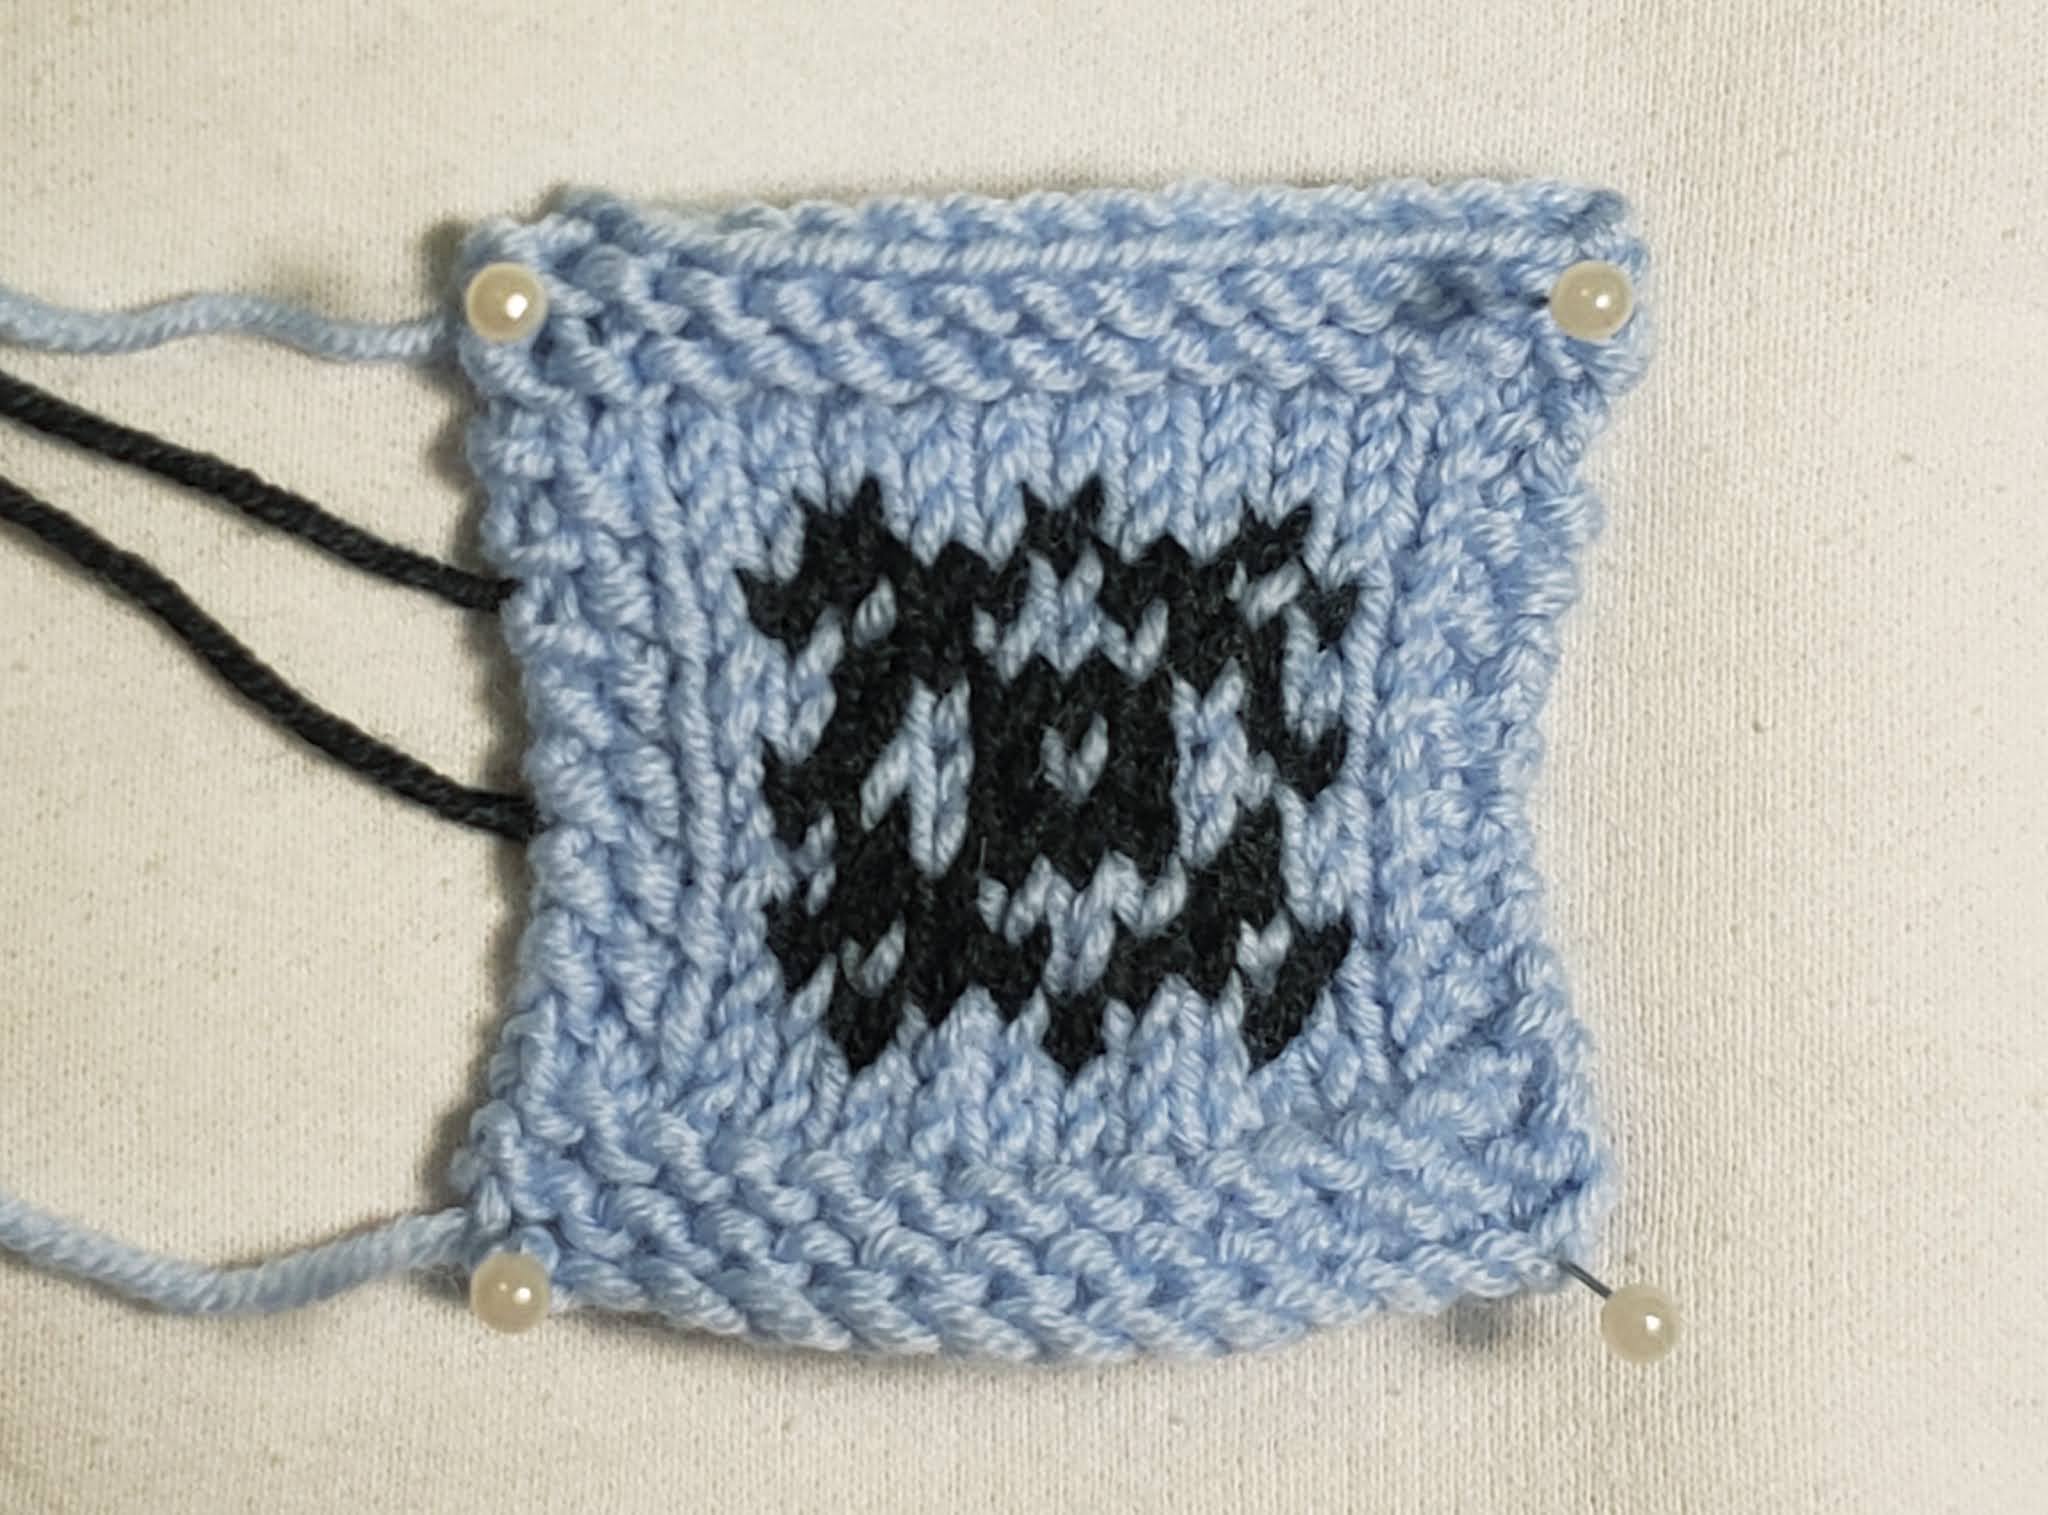 WIP Insanity: Can you use stranded knitting charts for double knitting?